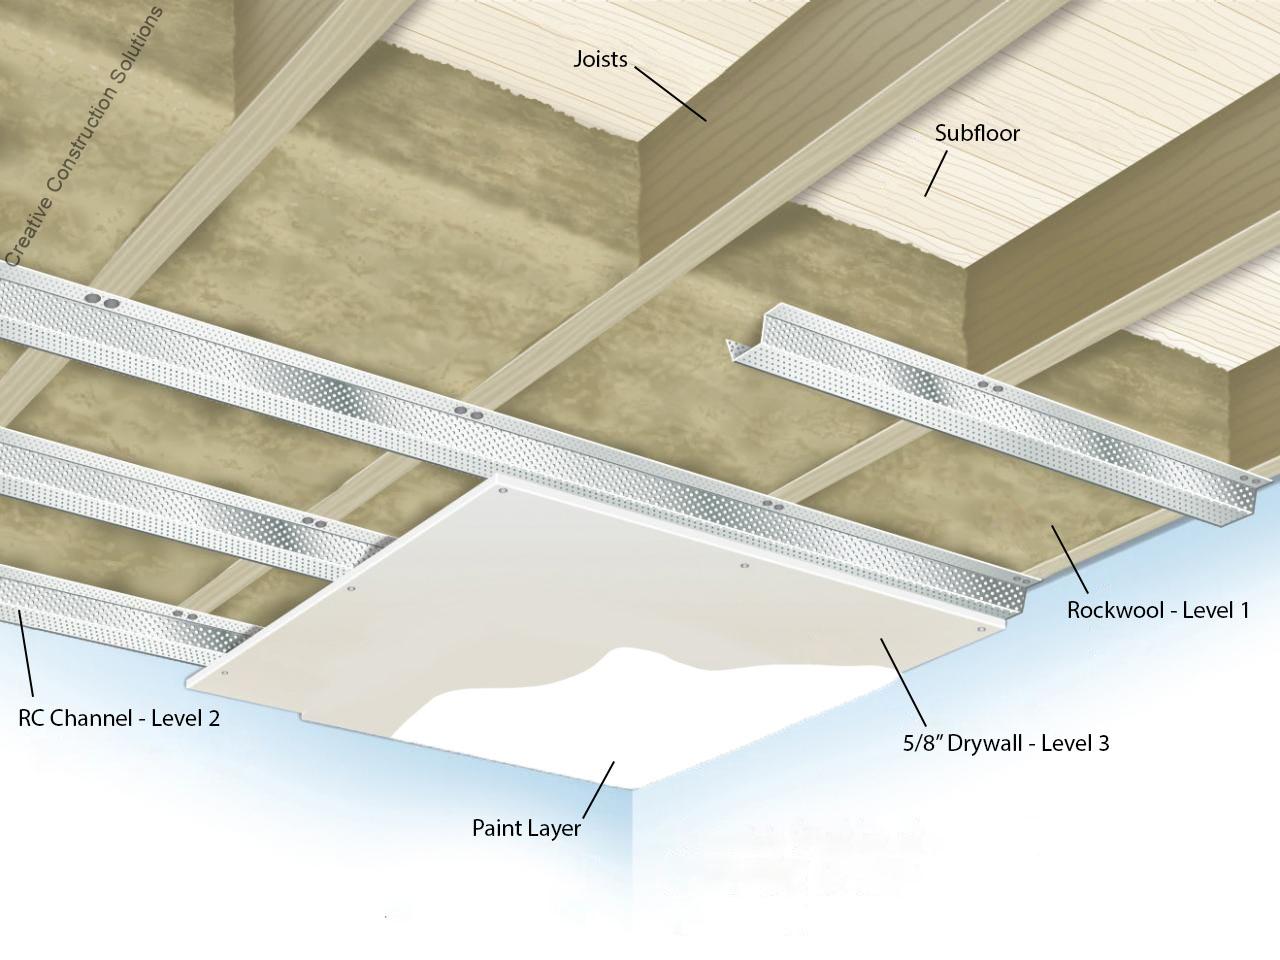 An illustration of sound dampening levels that Creative Construction Solutions of Utah uses. Looking up to an exposed ceiling with subfloor, joists, Rockwool, RC Channel, 5/8" drywall, and a paint layer.